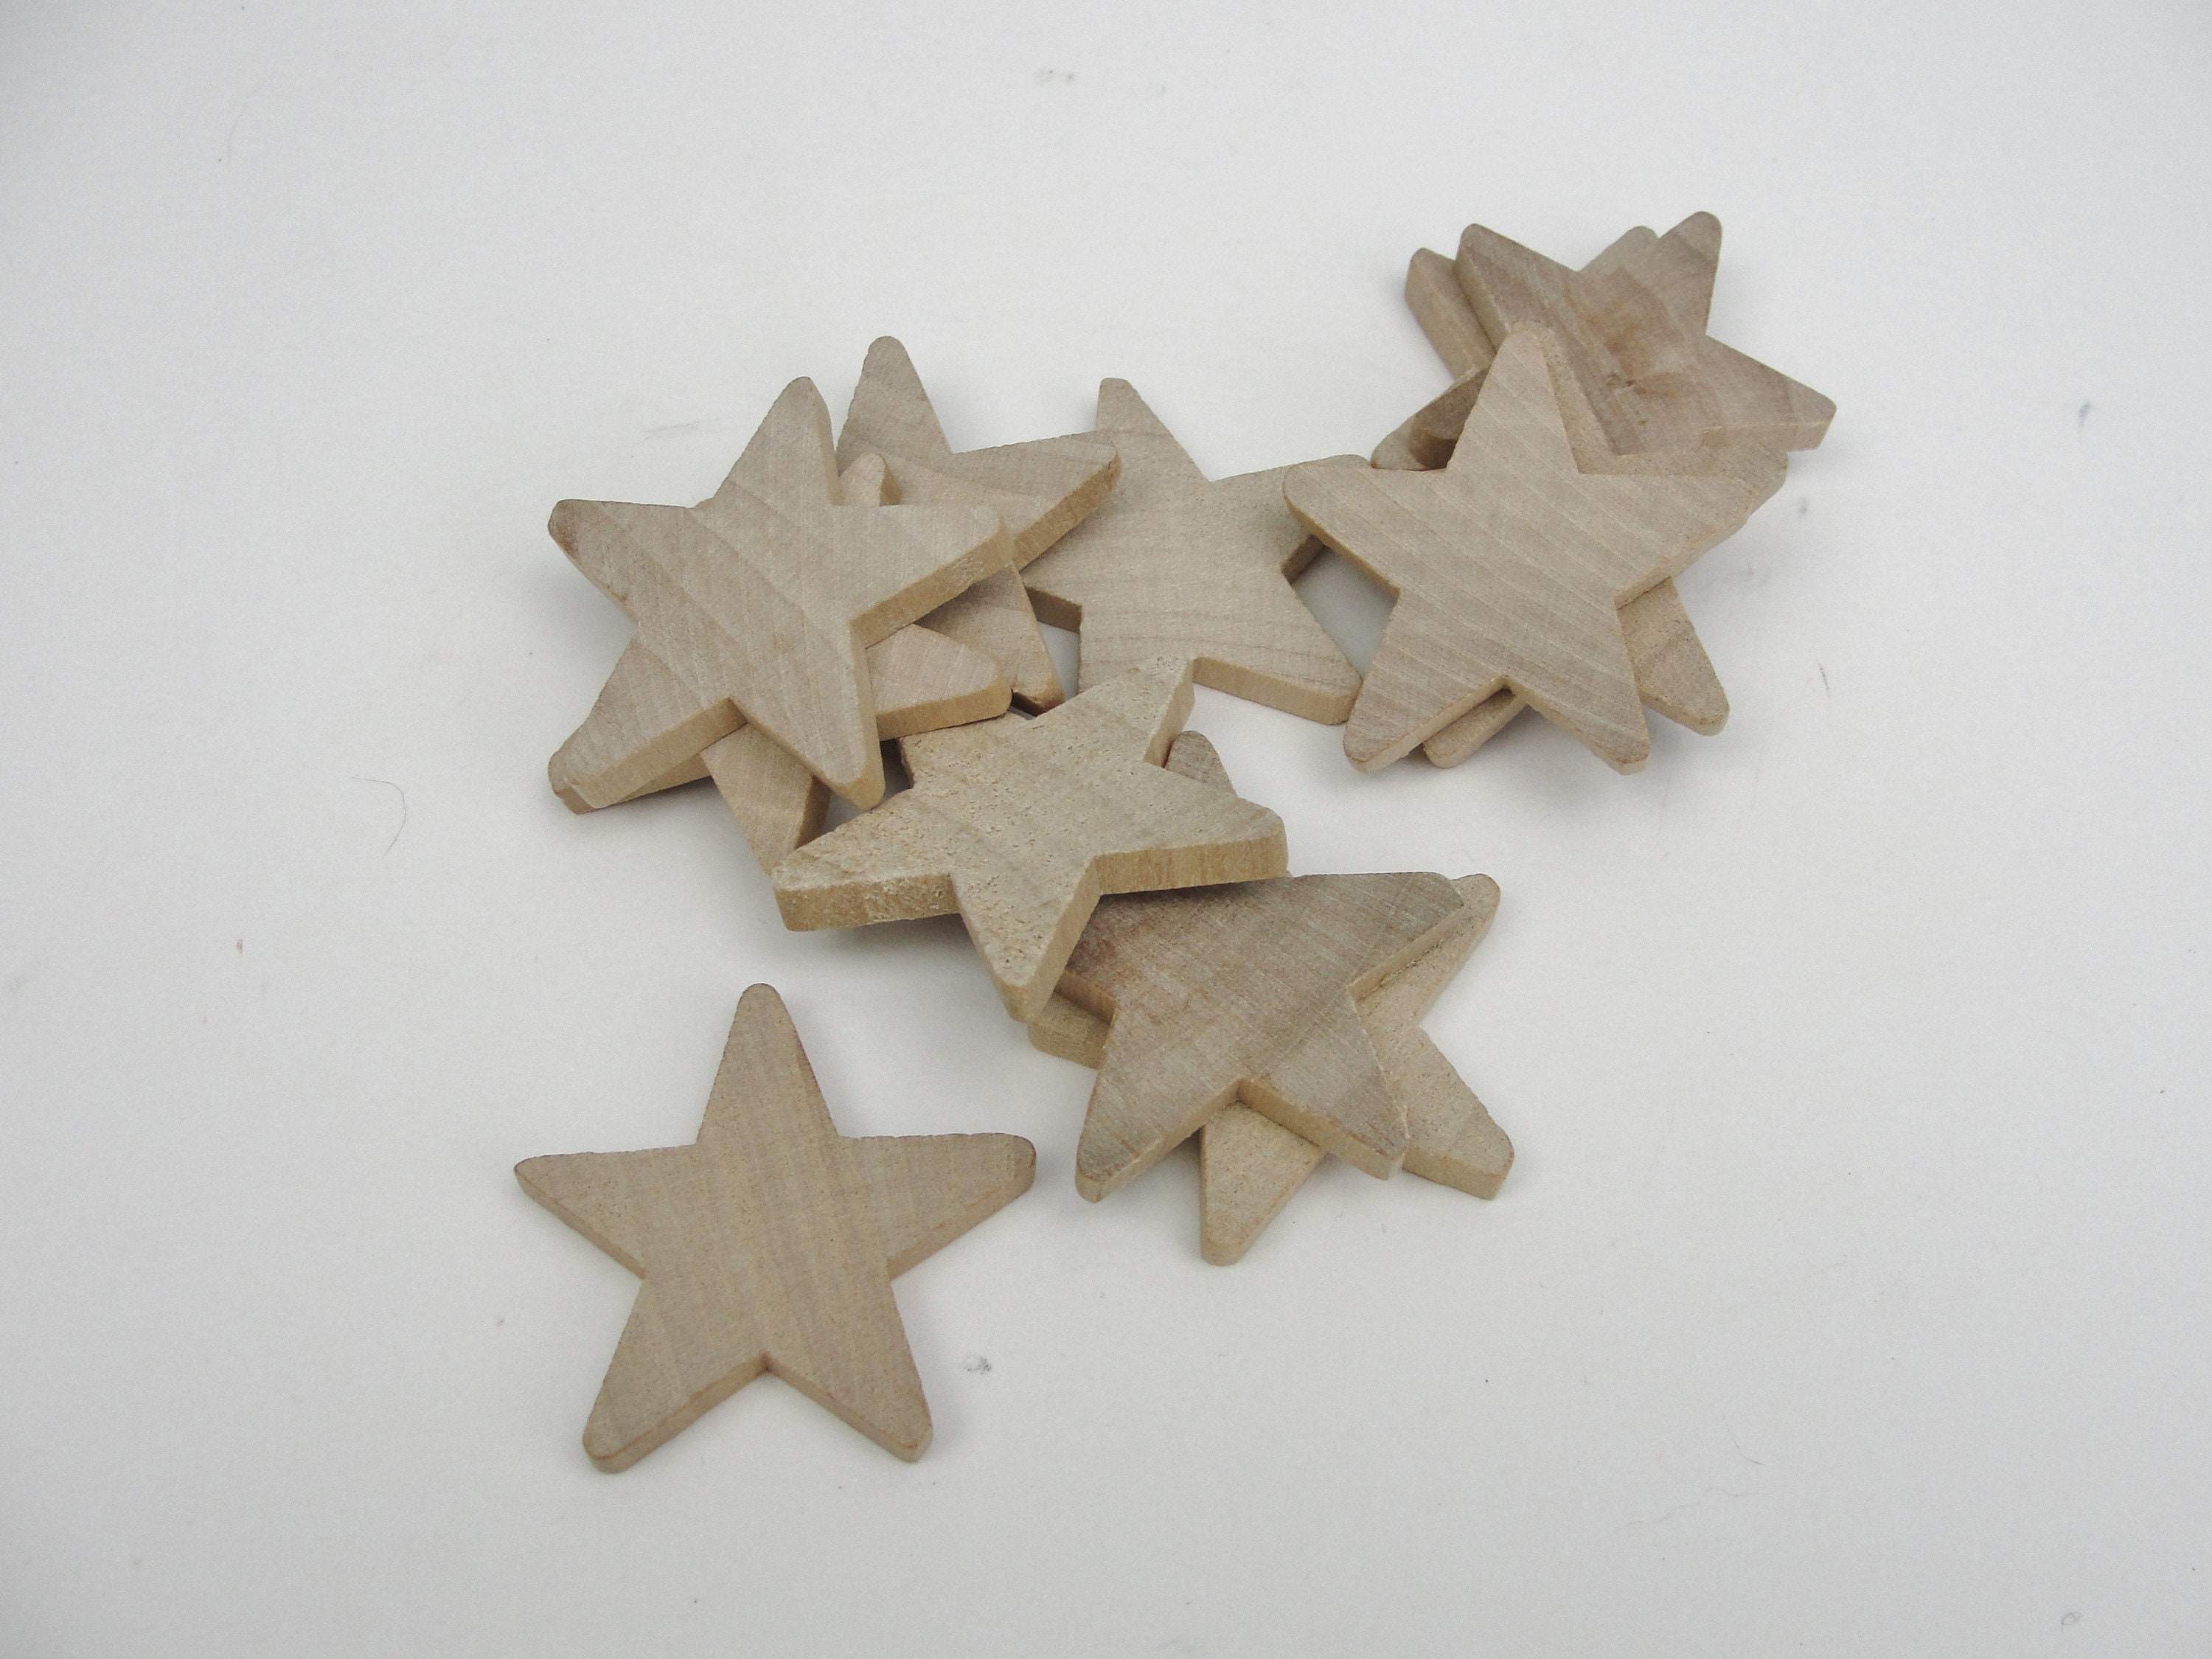 Miniature Wood Letters and Numbers 49 Laser Cut 1/2 Inch Pieces 